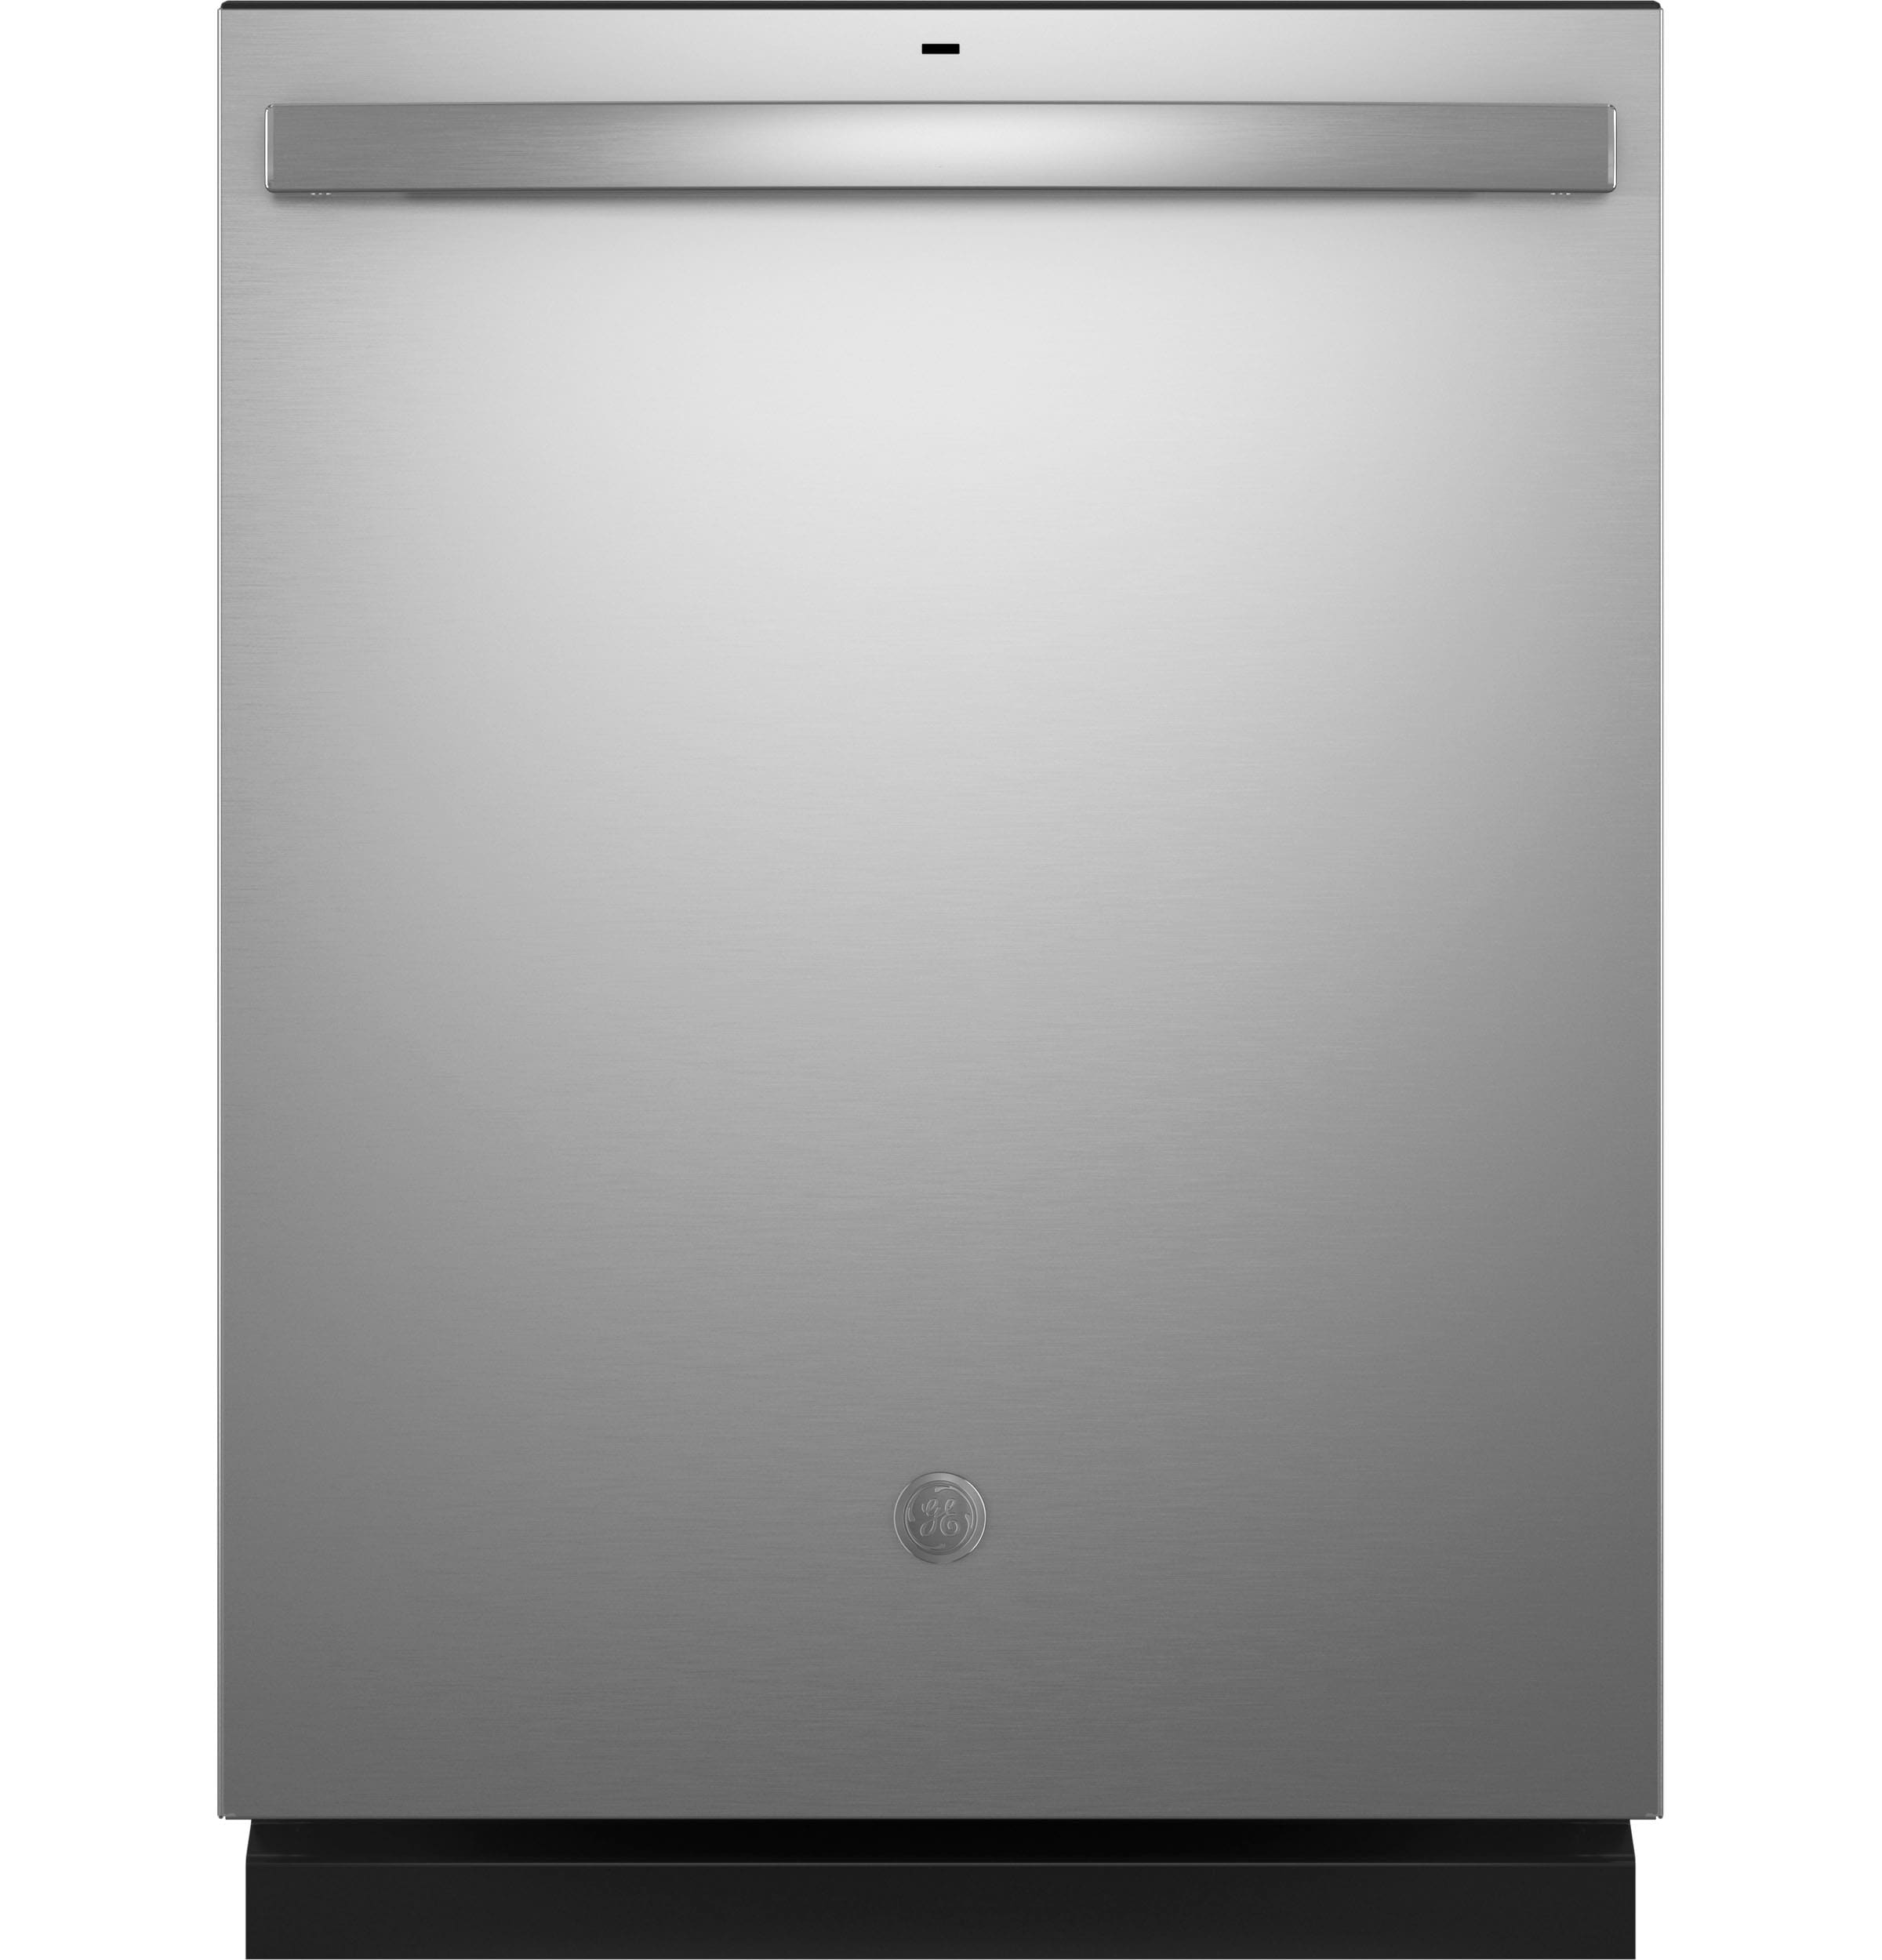 LG QuadWash Front Control 24-in Built-In Dishwasher (Black Stainless Steel)  ENERGY STAR, 48-dBA in the Built-In Dishwashers department at